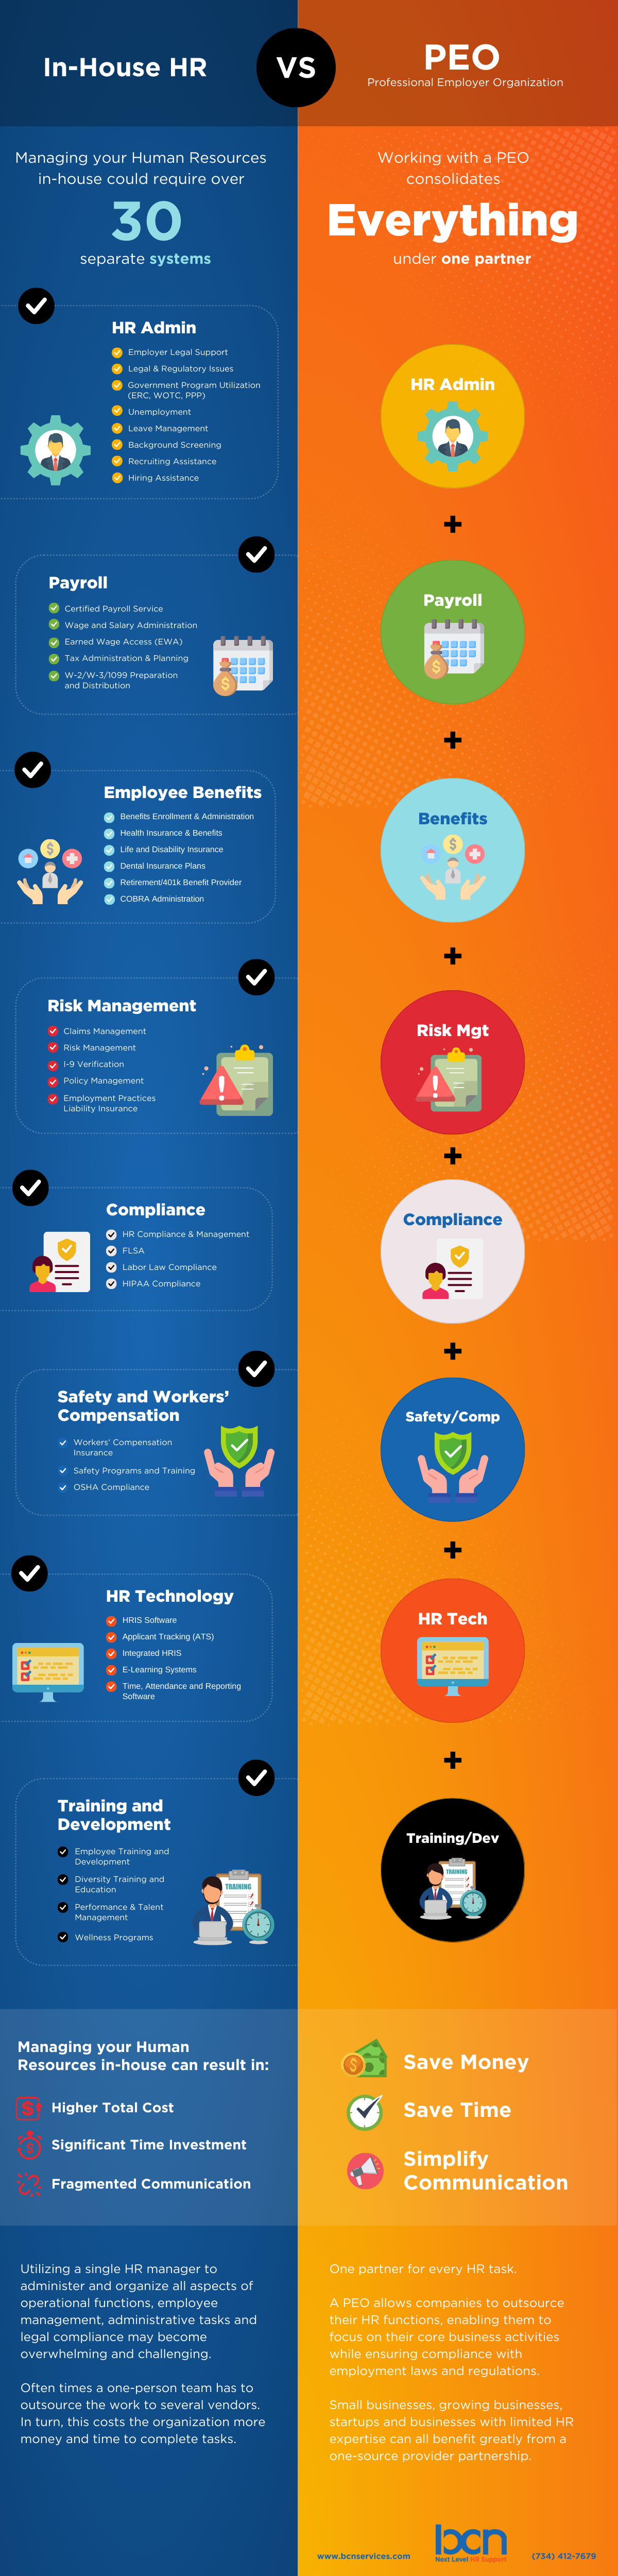 In-House HR vs. PEO infographic